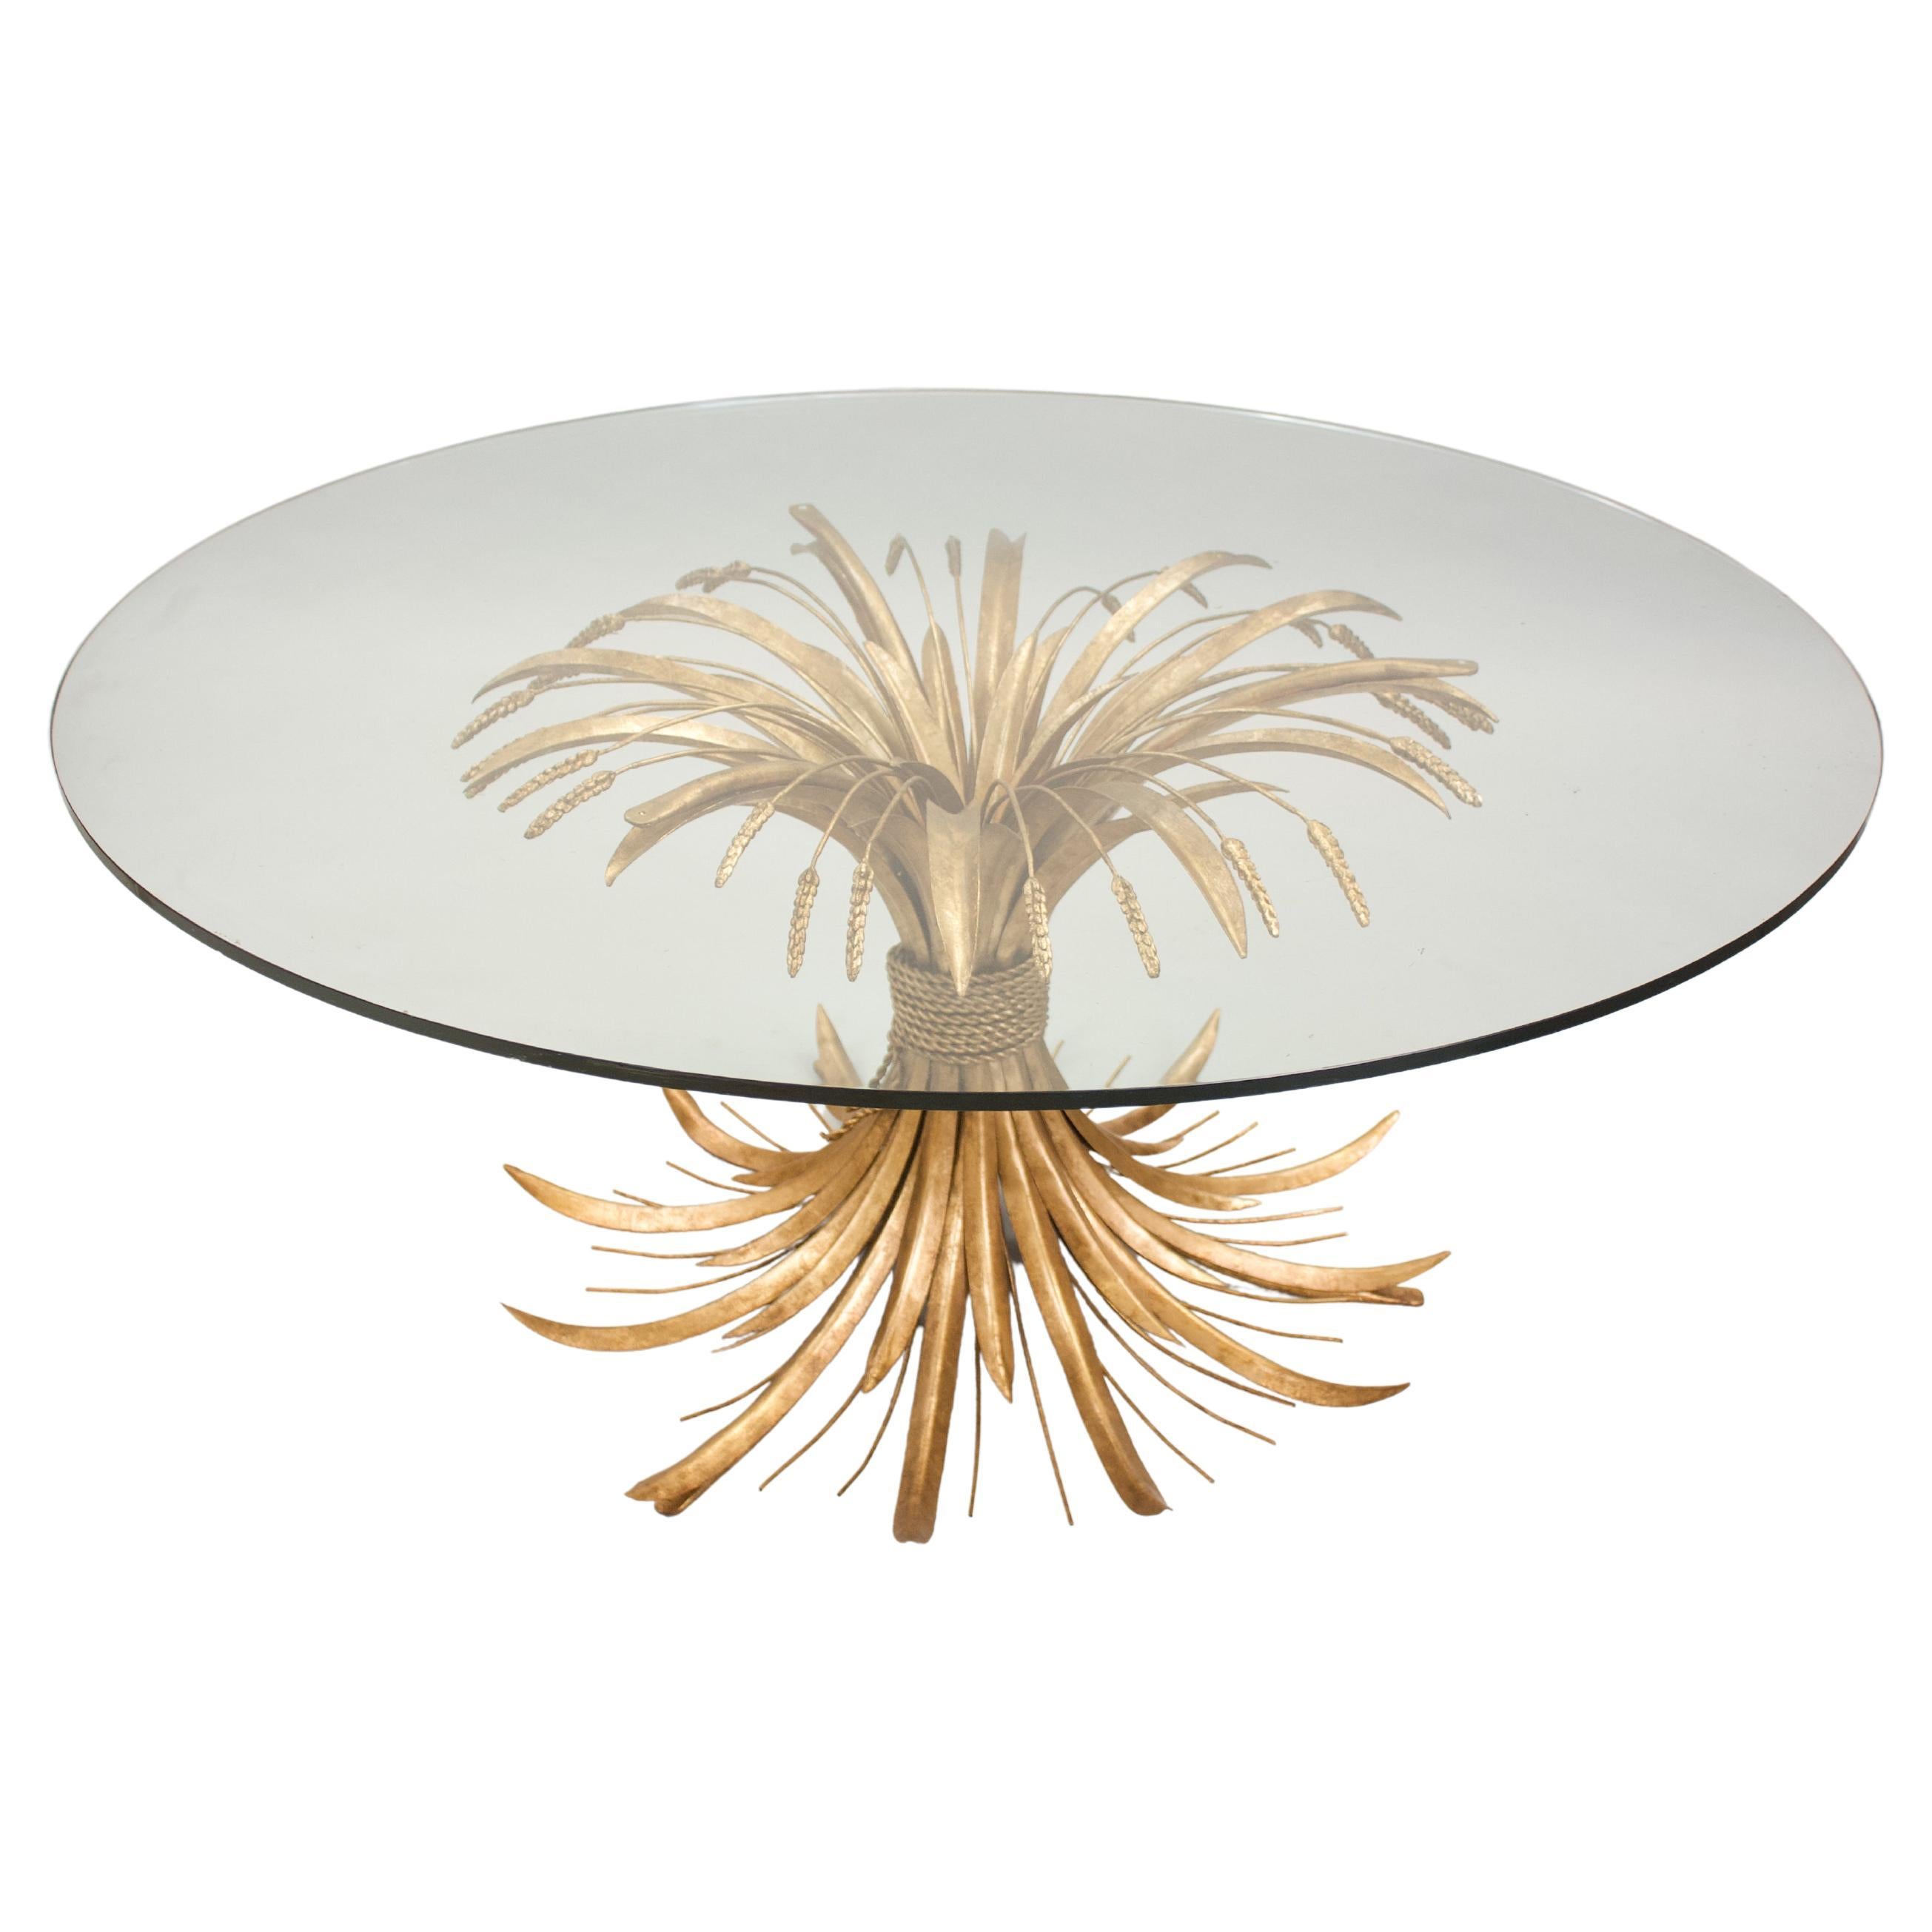 Exceptional Large Round Low Table. Similar table at Coco Chanel’s appartement.  For Sale